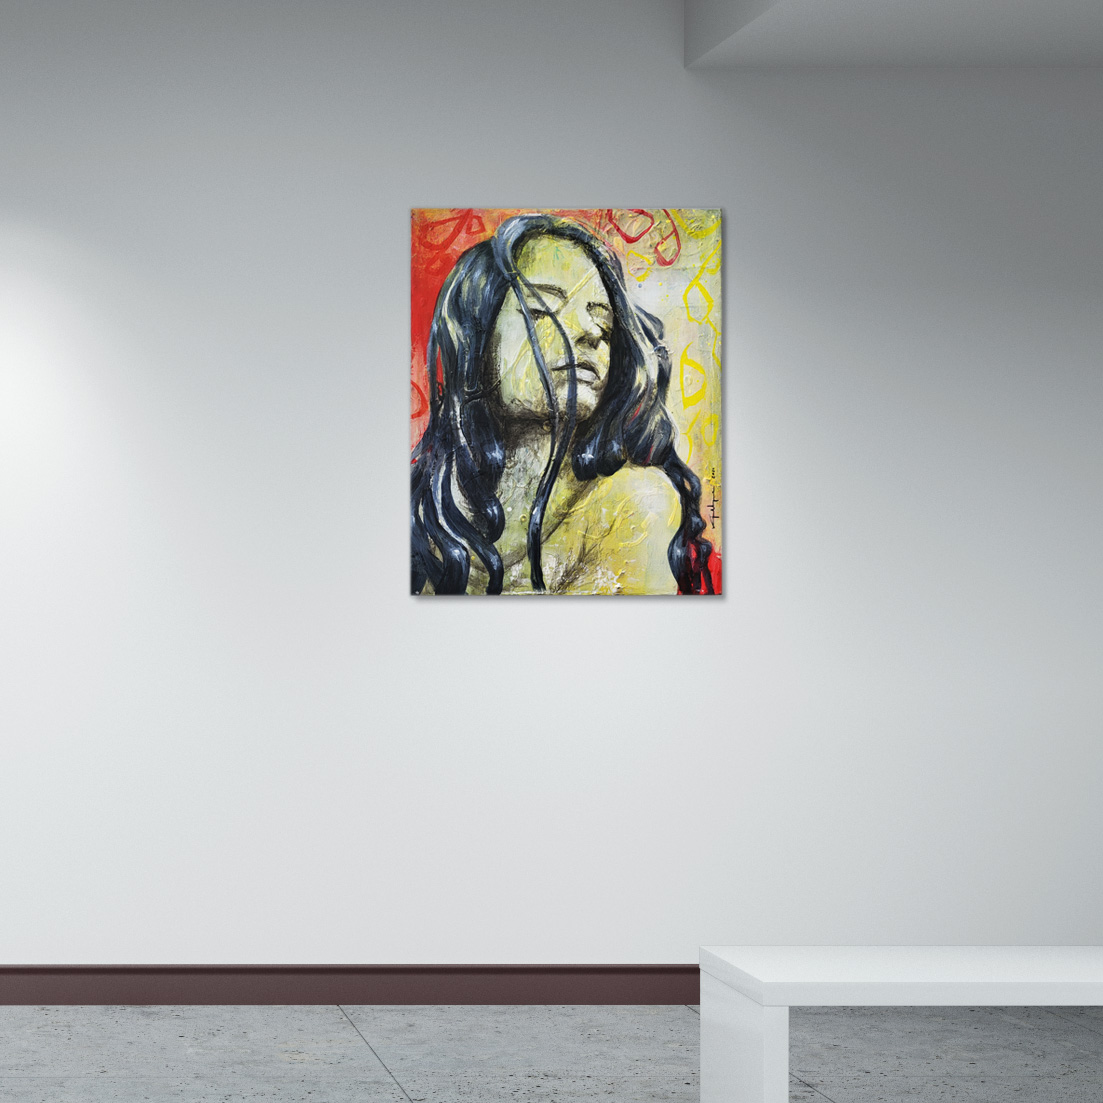 The painting 'Feels' in the gallery